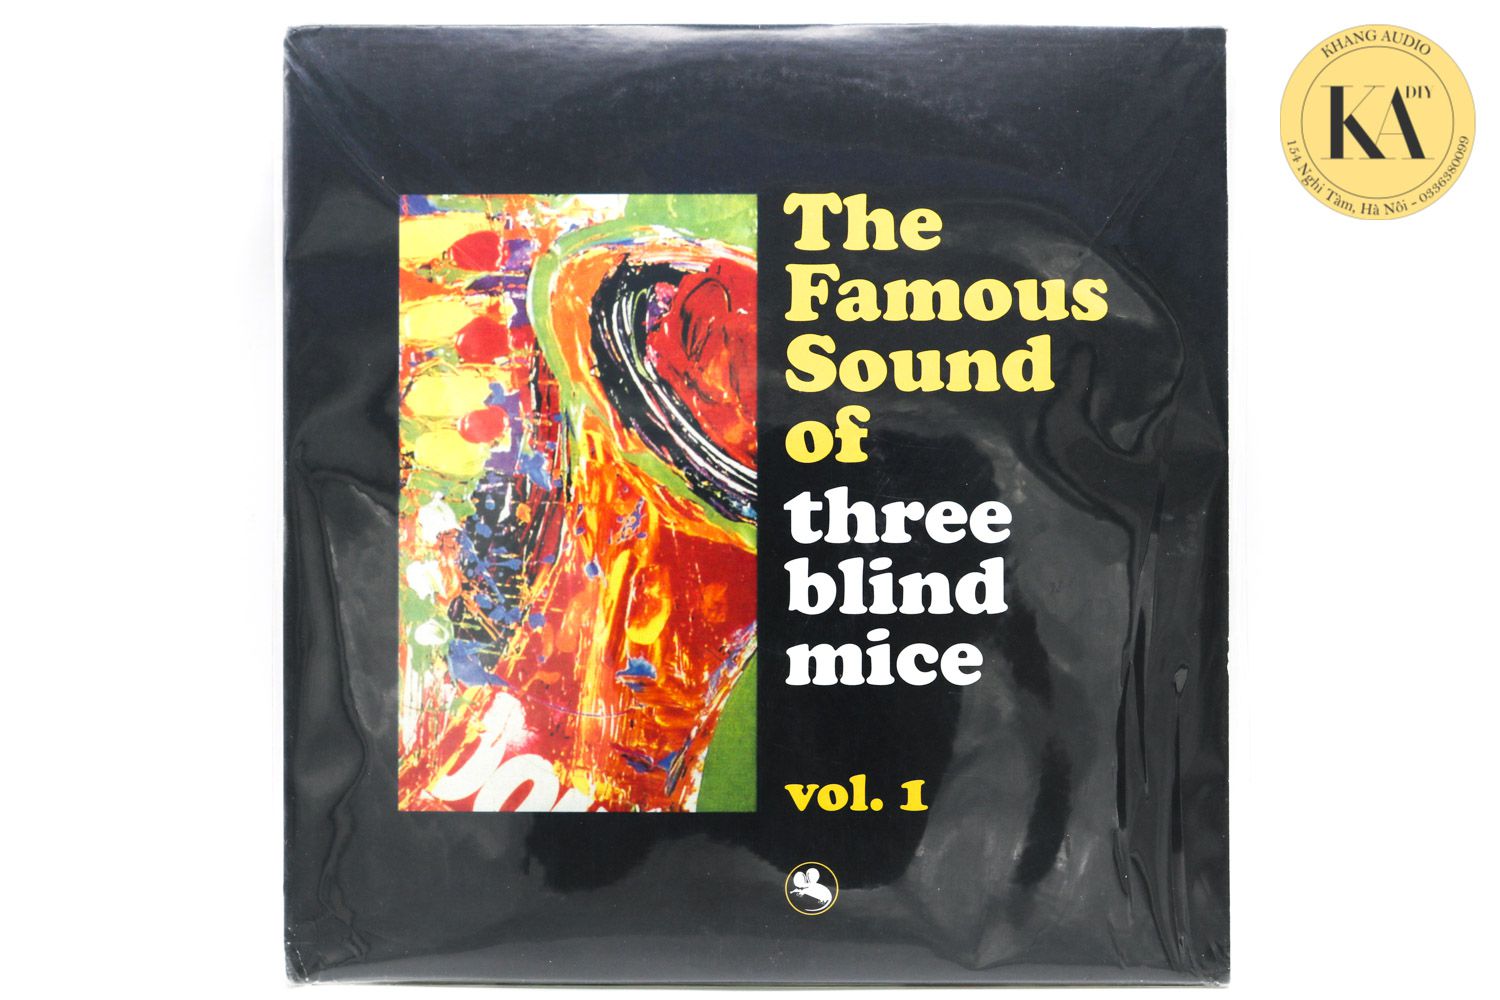 The Famous Sound Of Three Blind Mice Vol.1 Khang Audio 0336380099